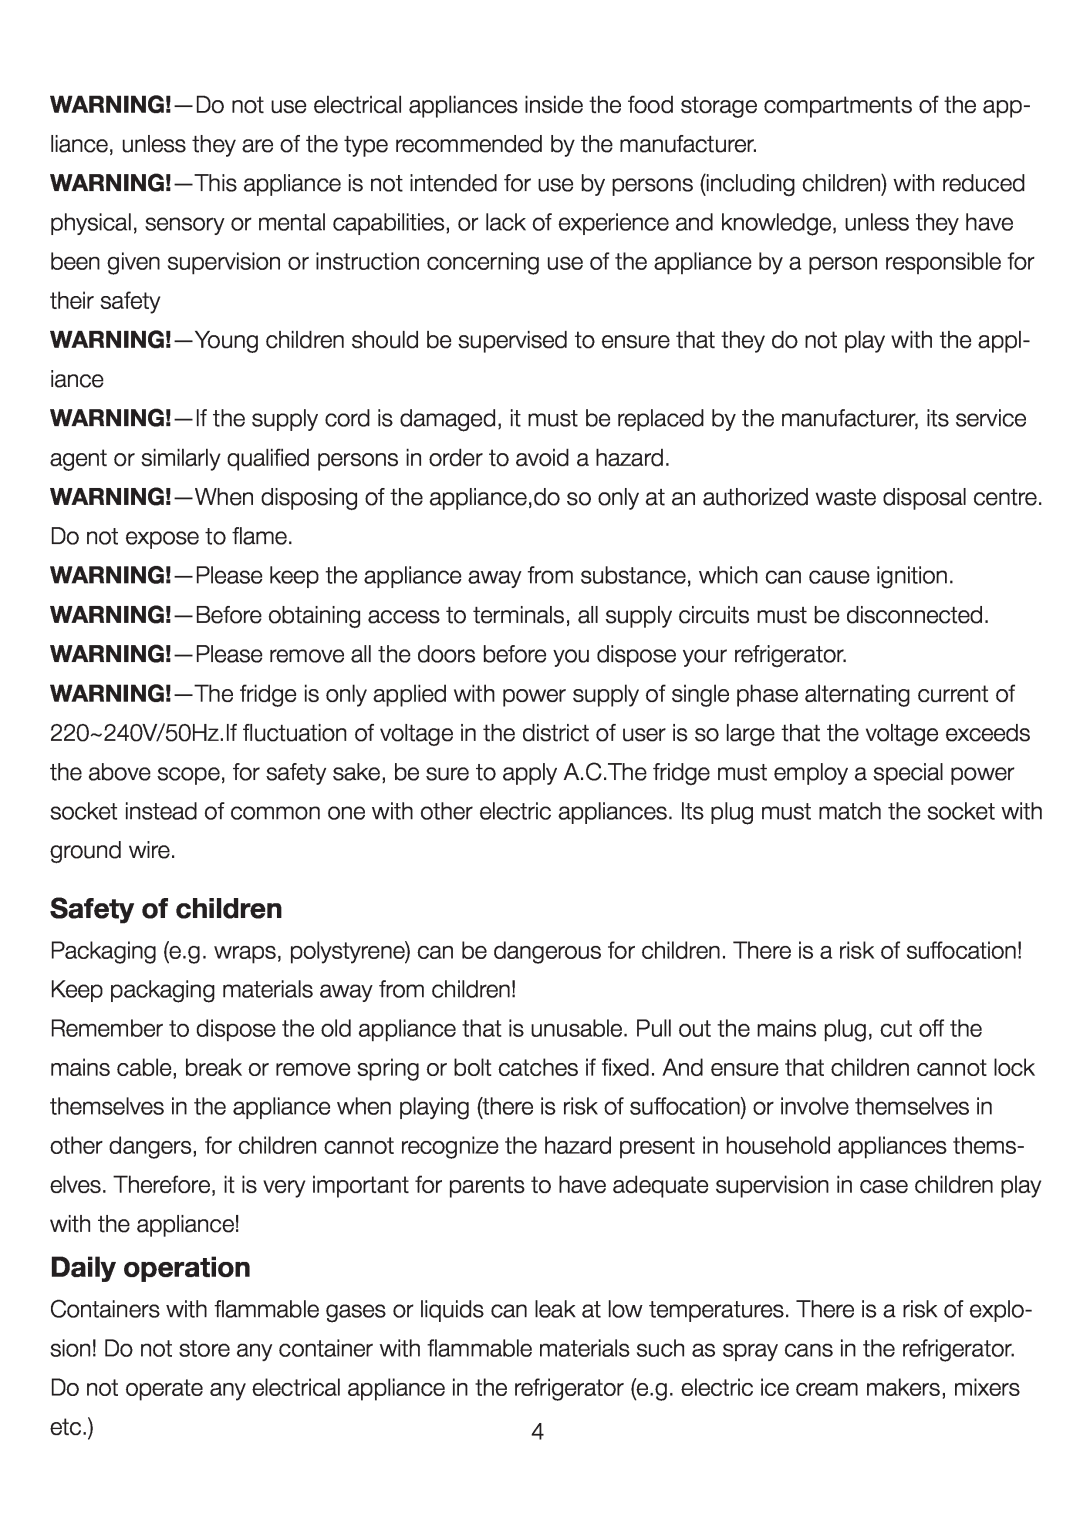 Ariston UP 350 FI (FE) manual Safety of children, Daily operation 